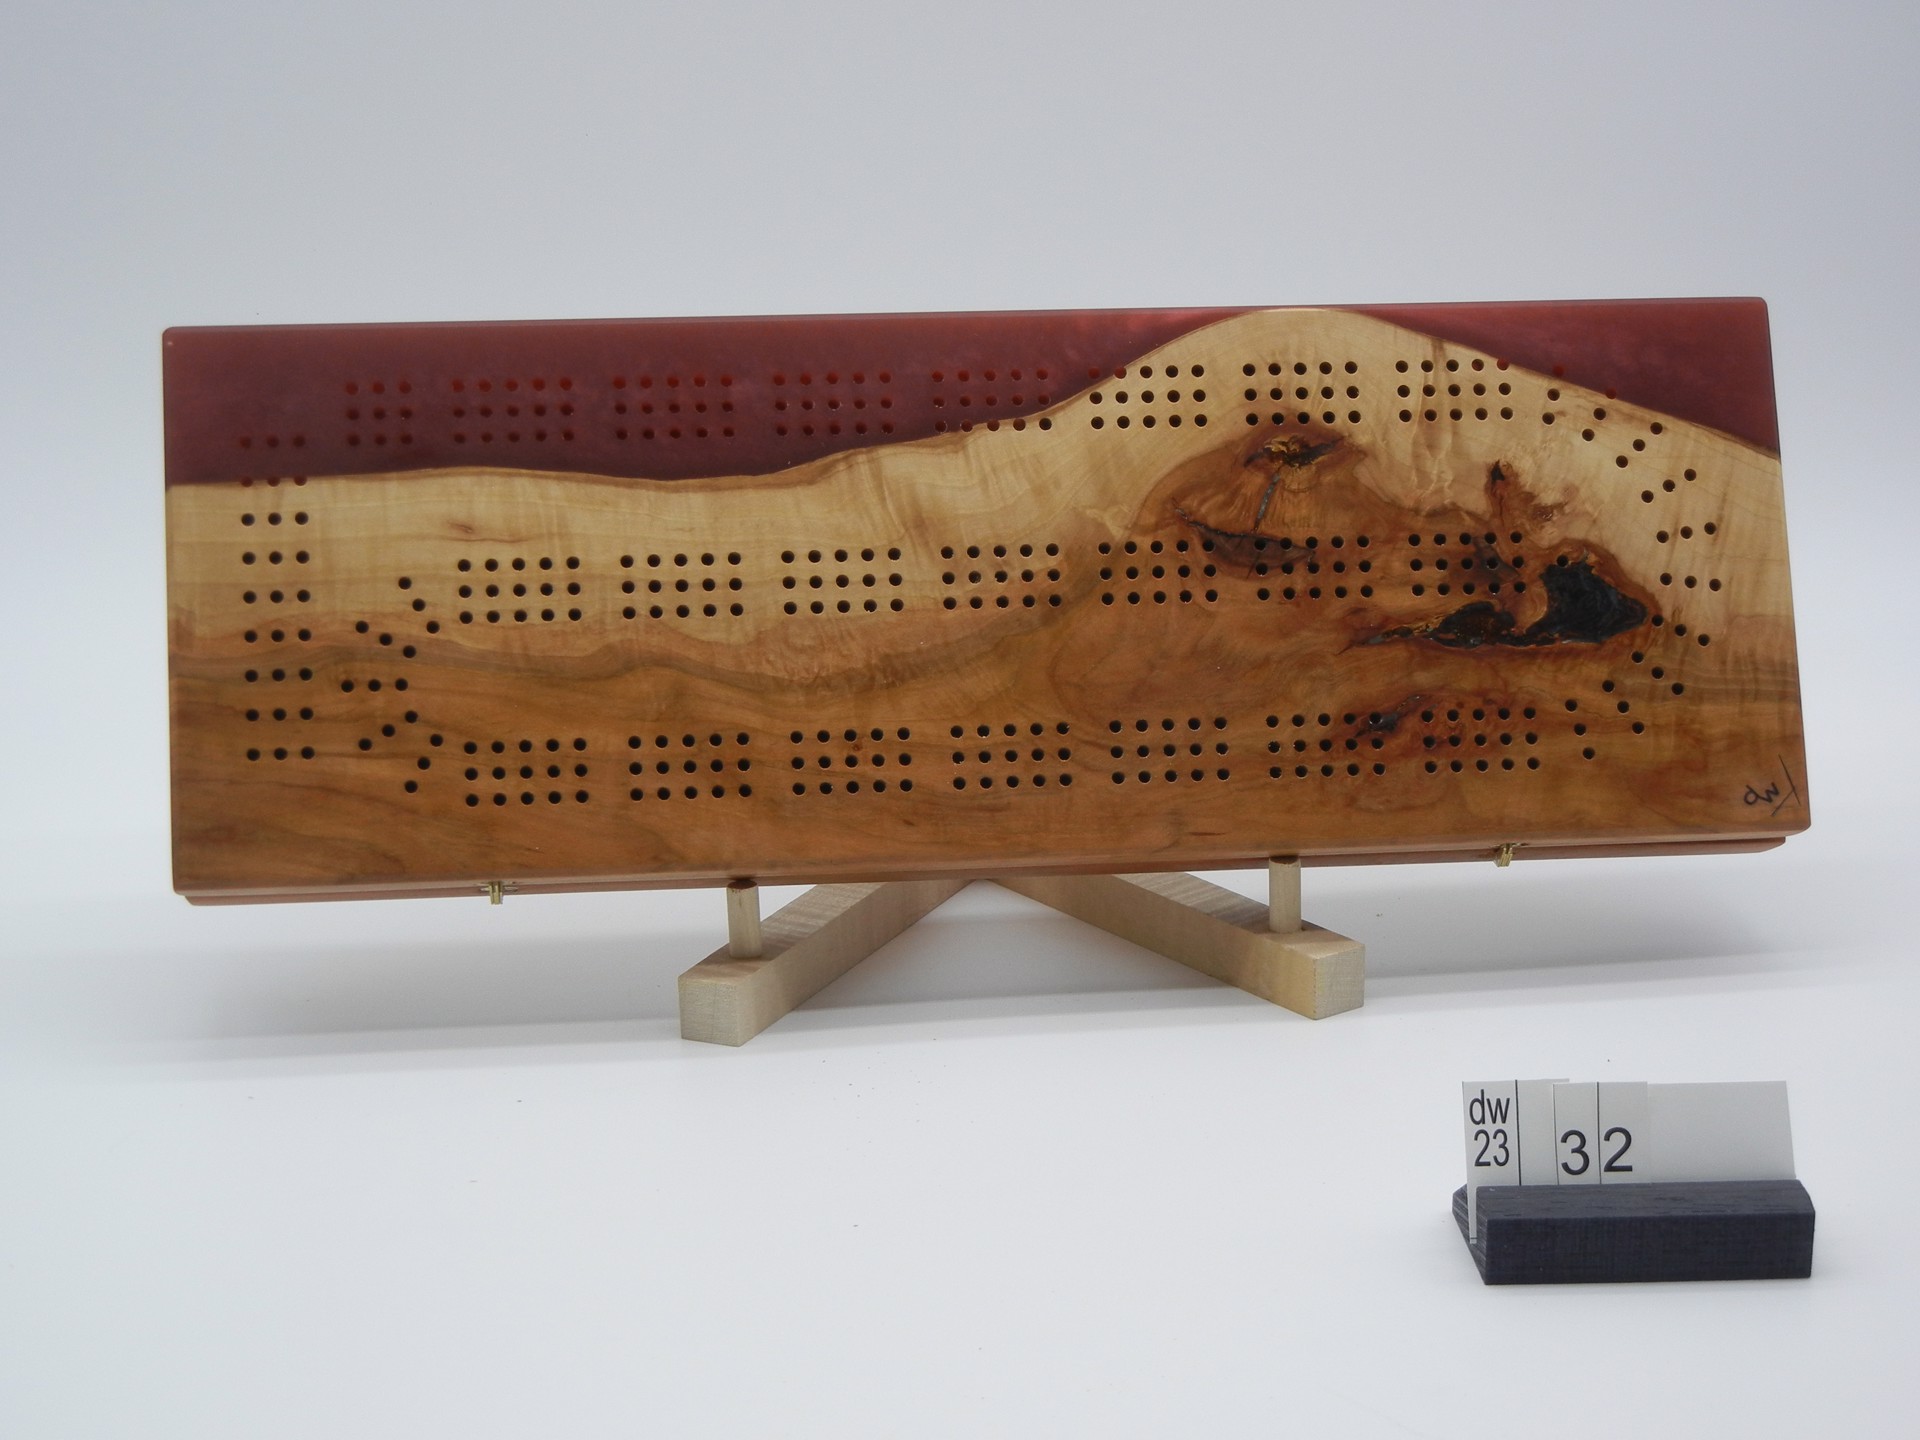 32 Cribbage Board (Three Person, with Pegs & Cards) by Dan Wieske